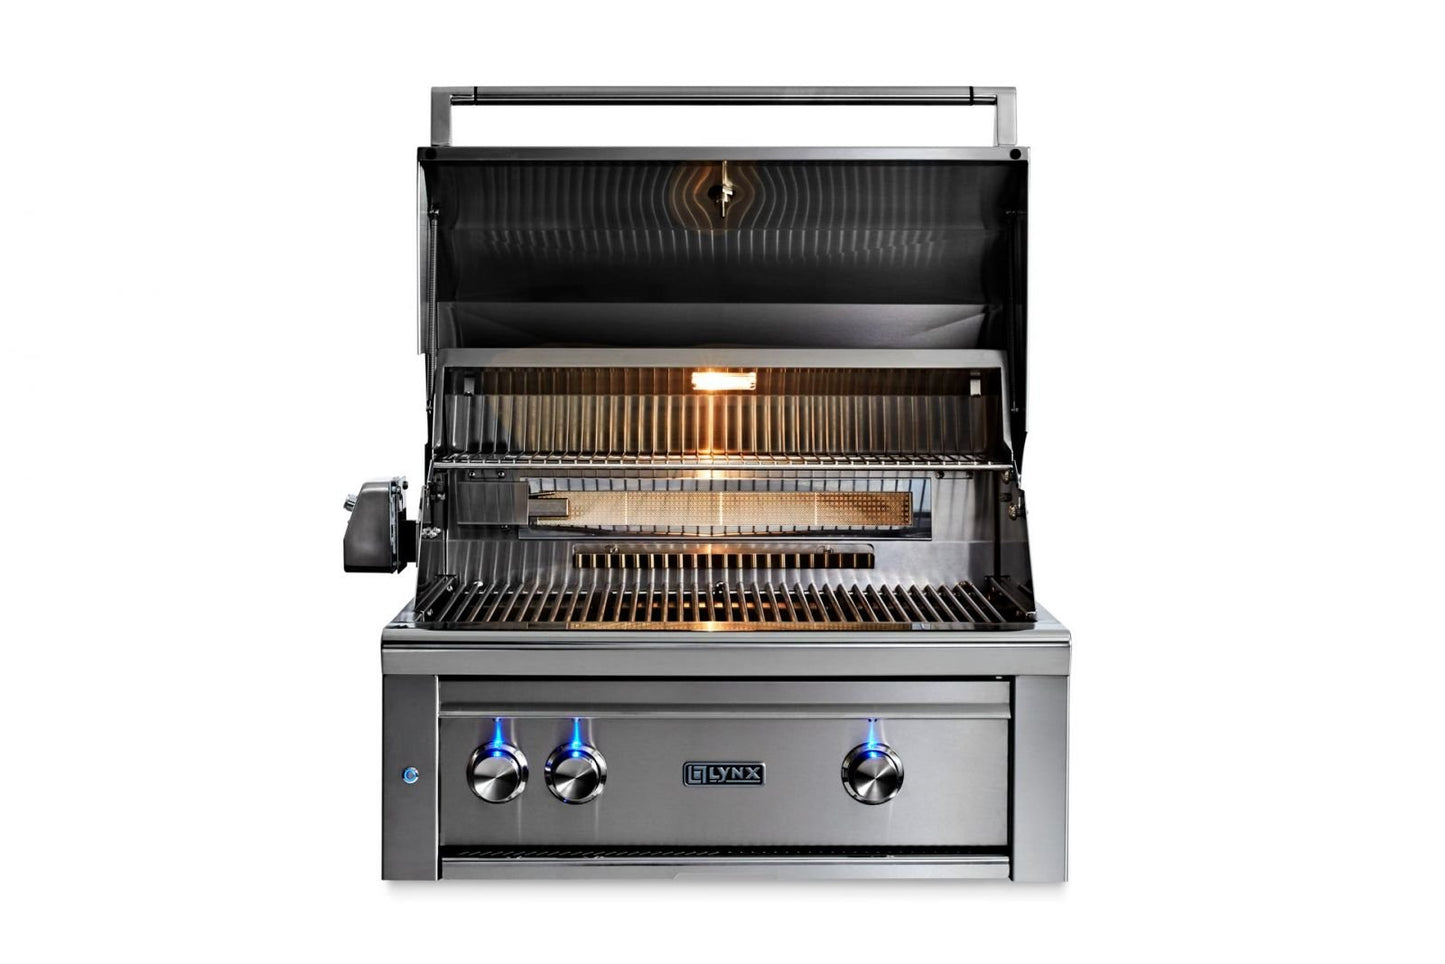 Lynx - 30" Professional Built-In Grill